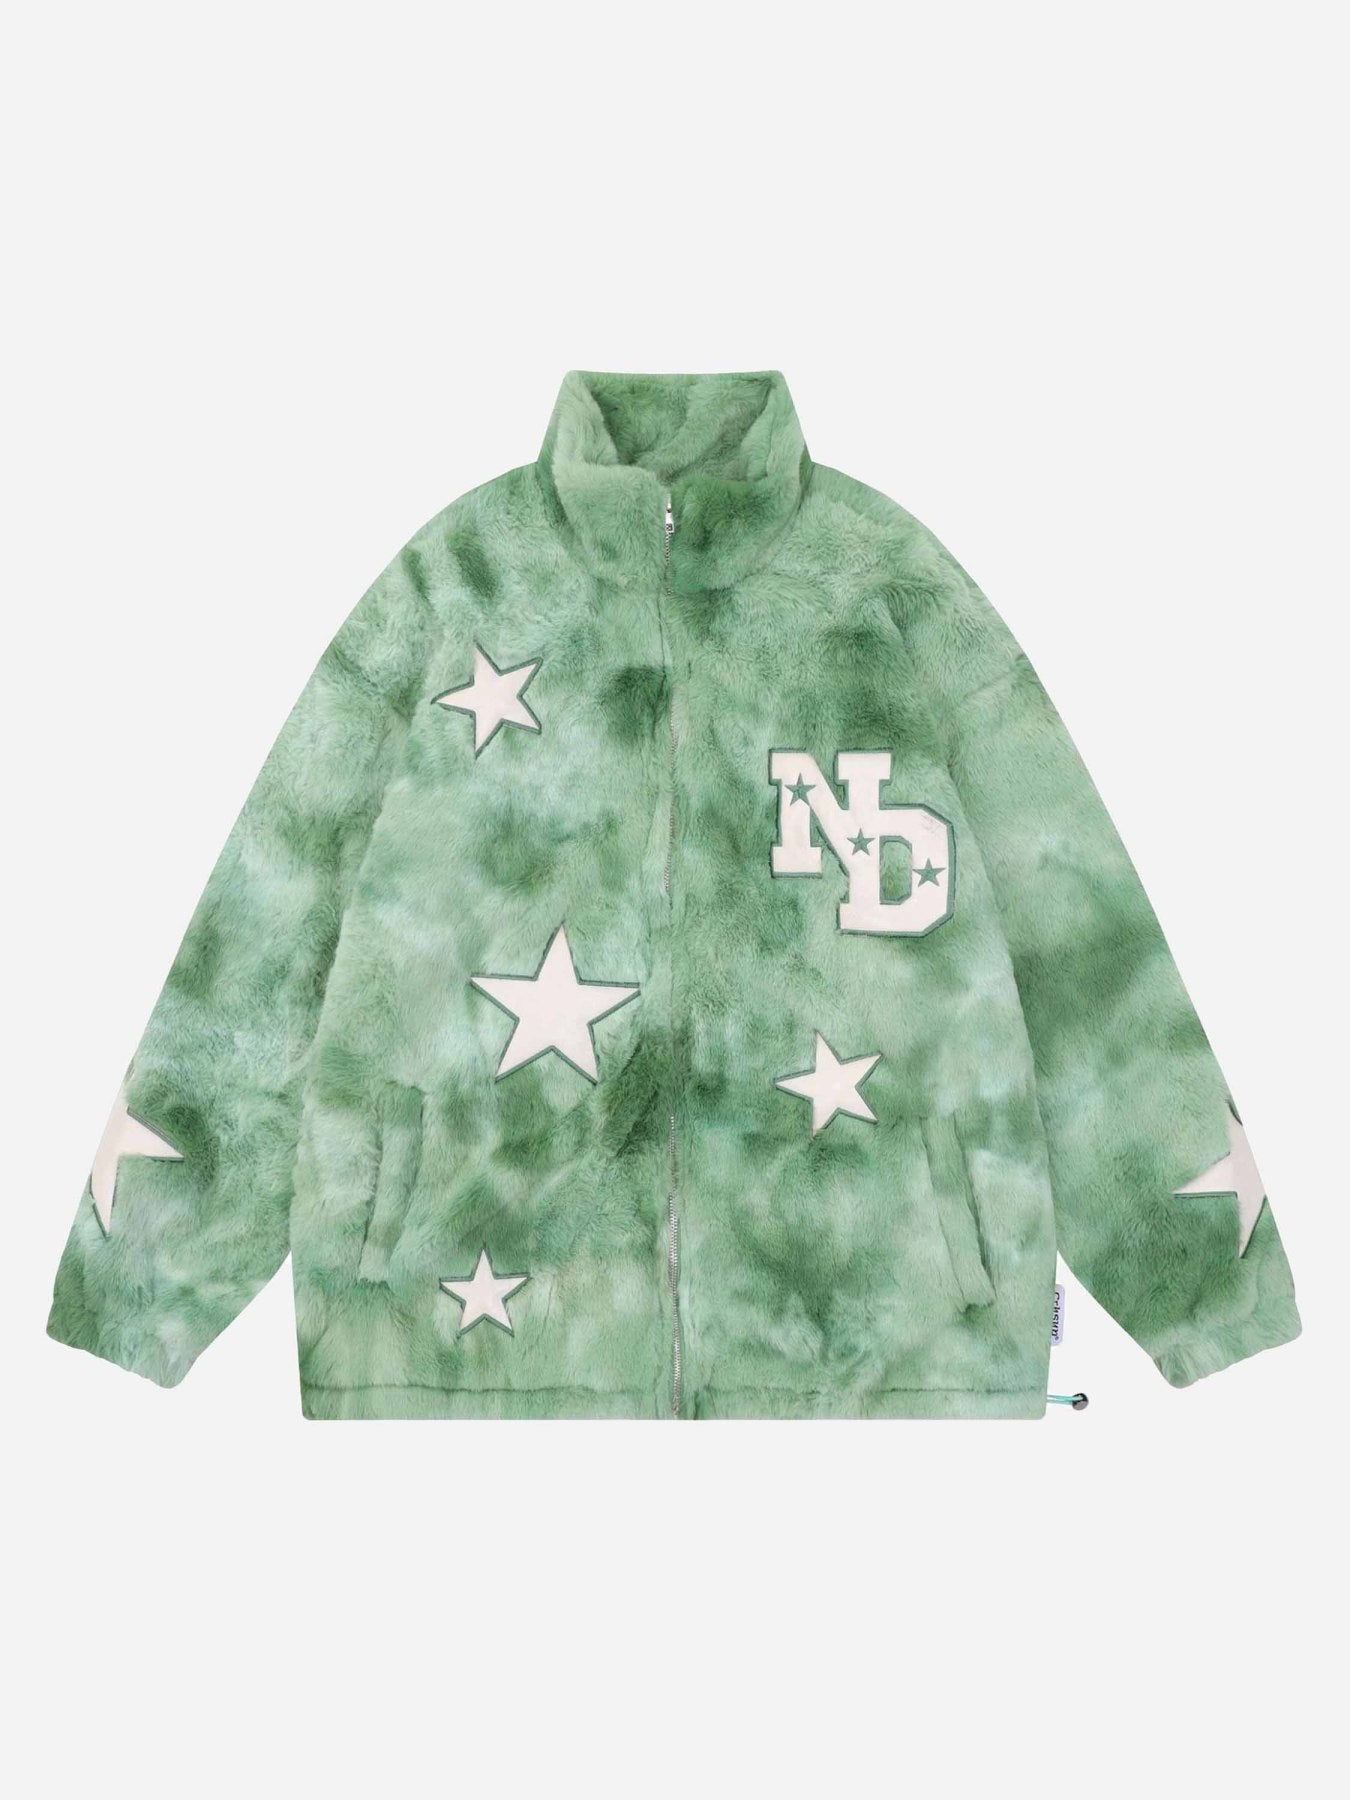 The Supermade Embroidered Star Lambswool Jacket